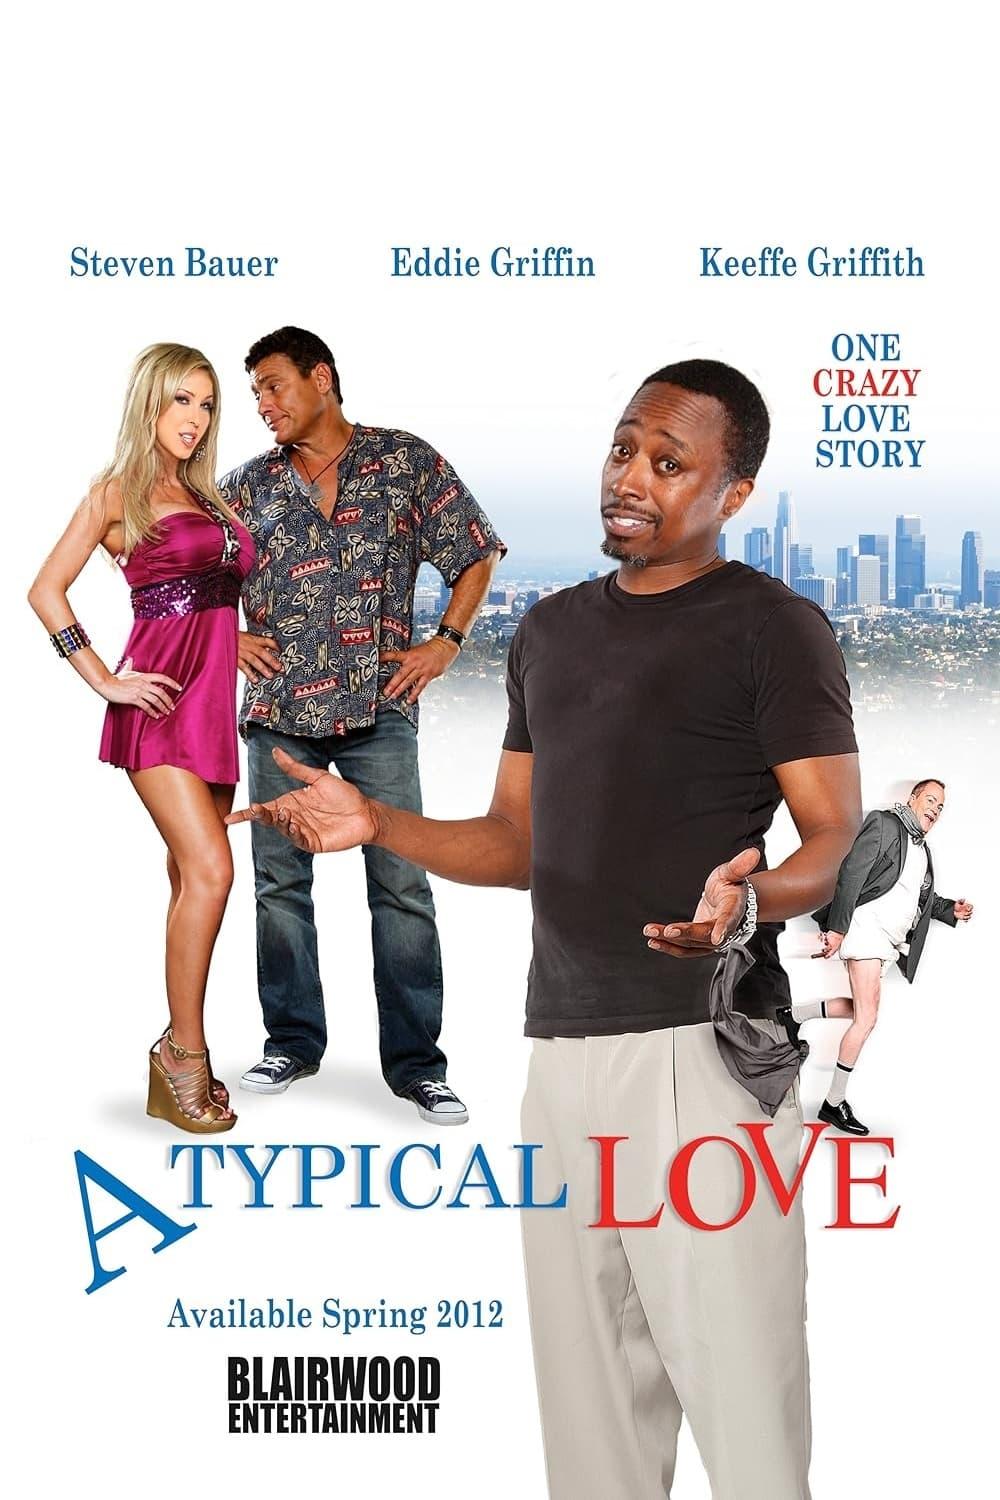 ATypical Love poster